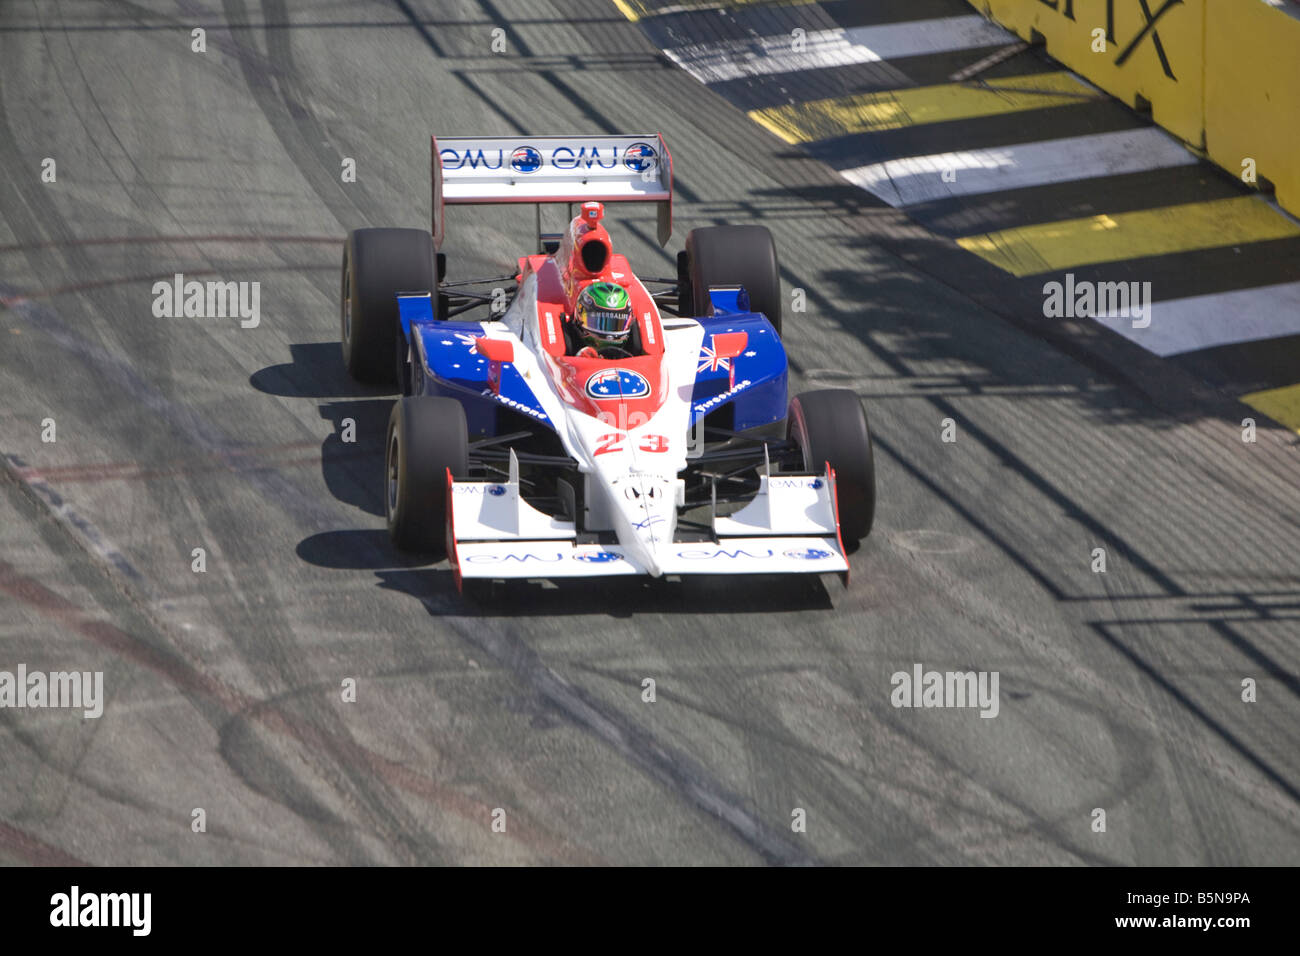 Mr Townsend Bell driving his racing car at the 2008 Nikon INDY 300 in Surfers Paradise, Gold Coast,Queensland Stock Photo